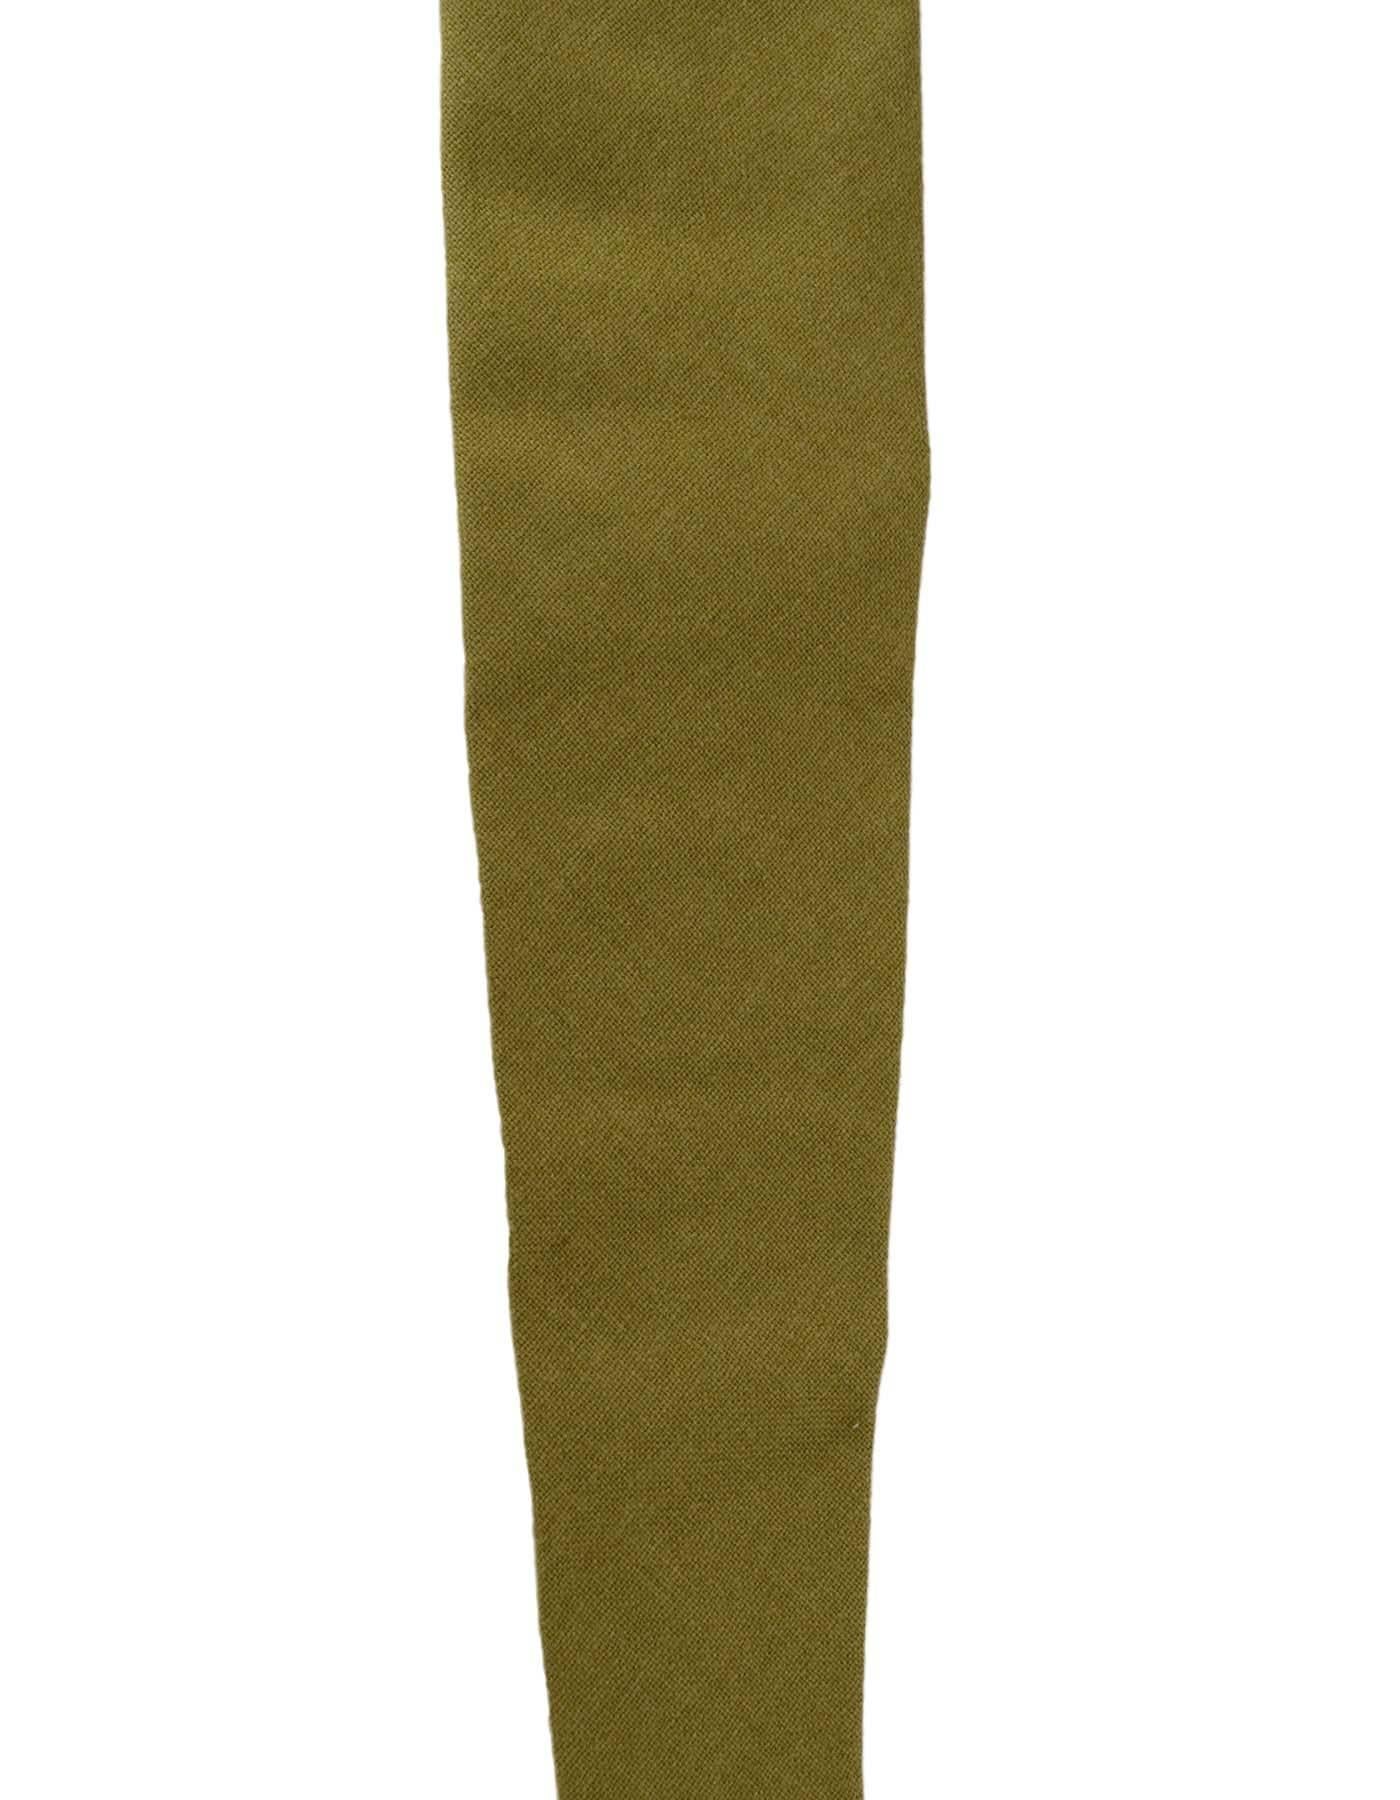 Hermes Khaki Green Cashmere Tie
Made In: France
Color: Khaki green
Composition: 100% Cashmere
Overall Condition: Excellent pre-owned condition
Measurements: 
Length:61.5